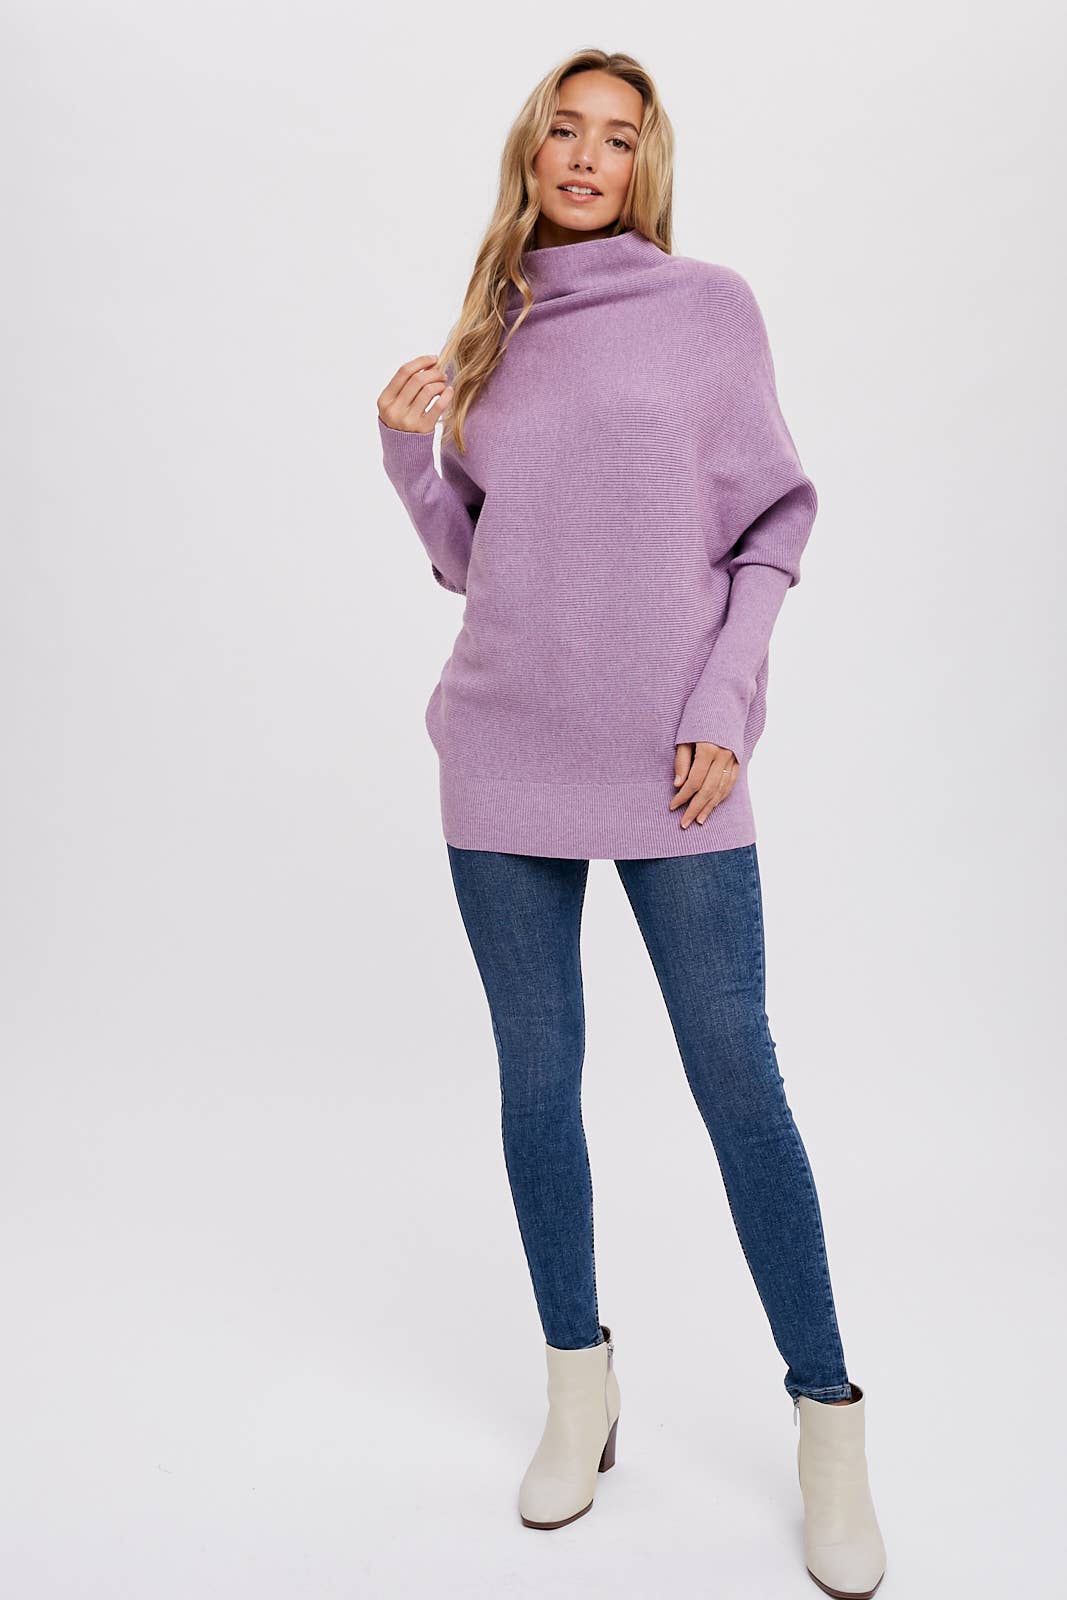 SLOUCH NECK DOLMAN PULLOVER: M/L / CHOCOLATE